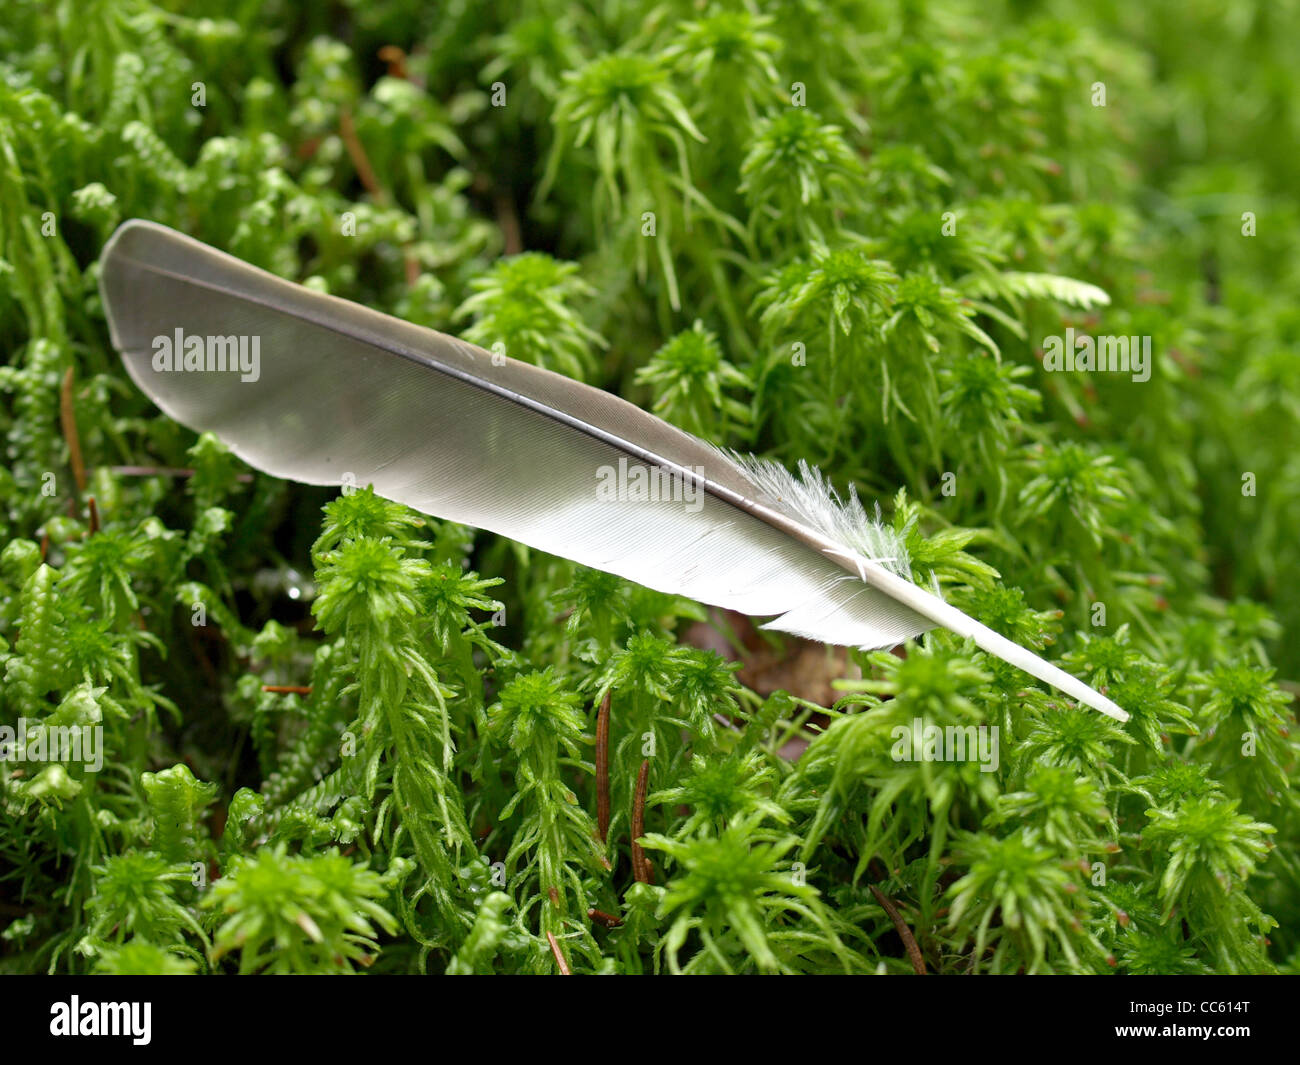 feather from a dove on moss / Feder einer Taube auf Moos Stock Photo